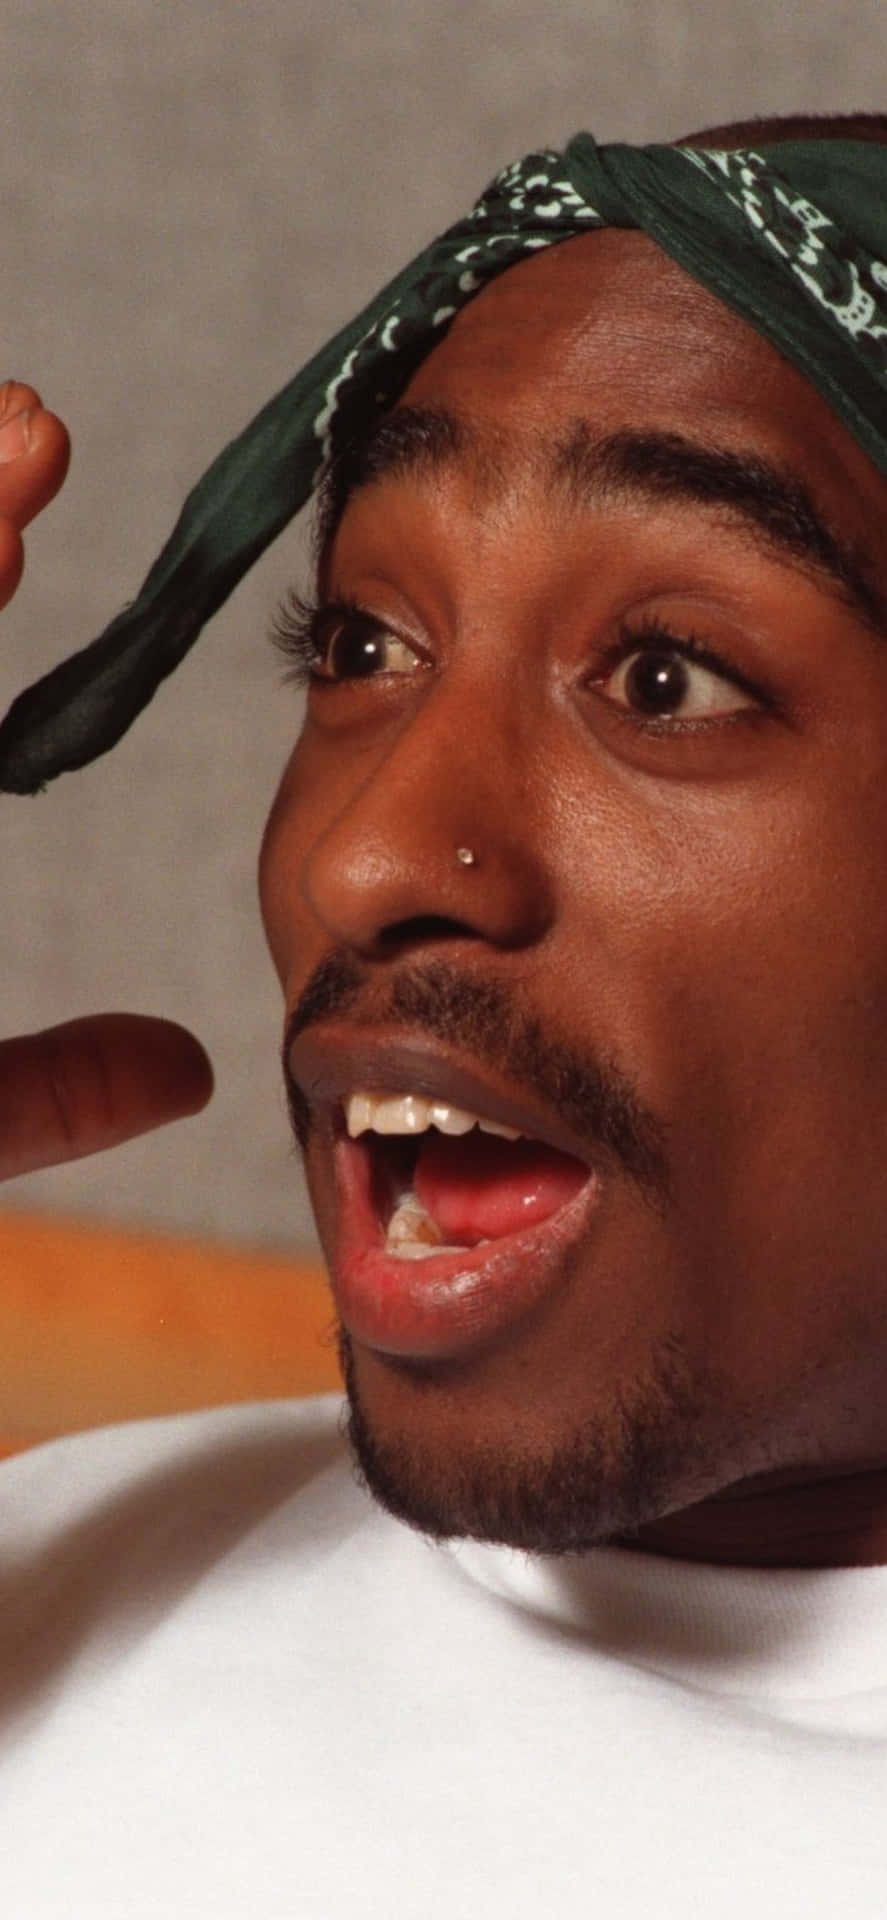 Surprised Facial Expression Tupac Iphone Wallpaper